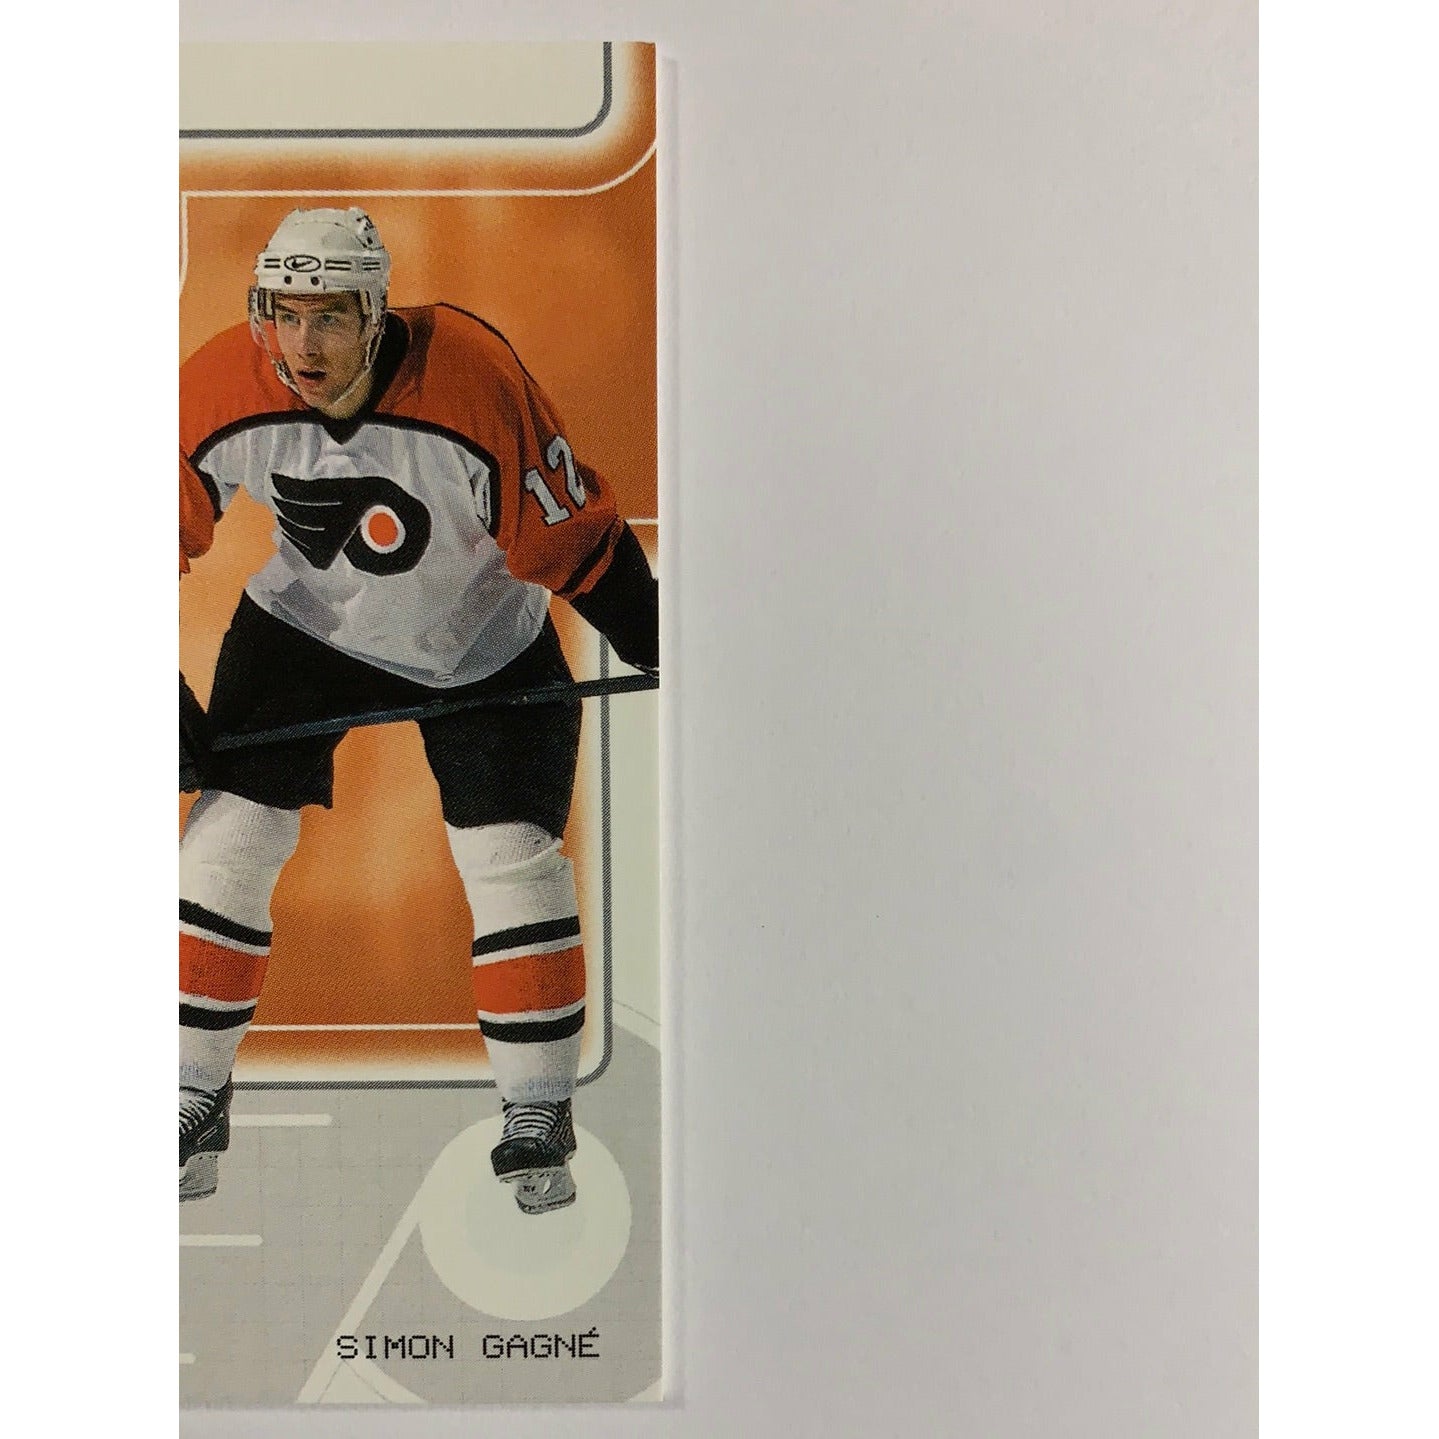 2003-04 Be A Player Simon Gagne Game Used Jersey Patch